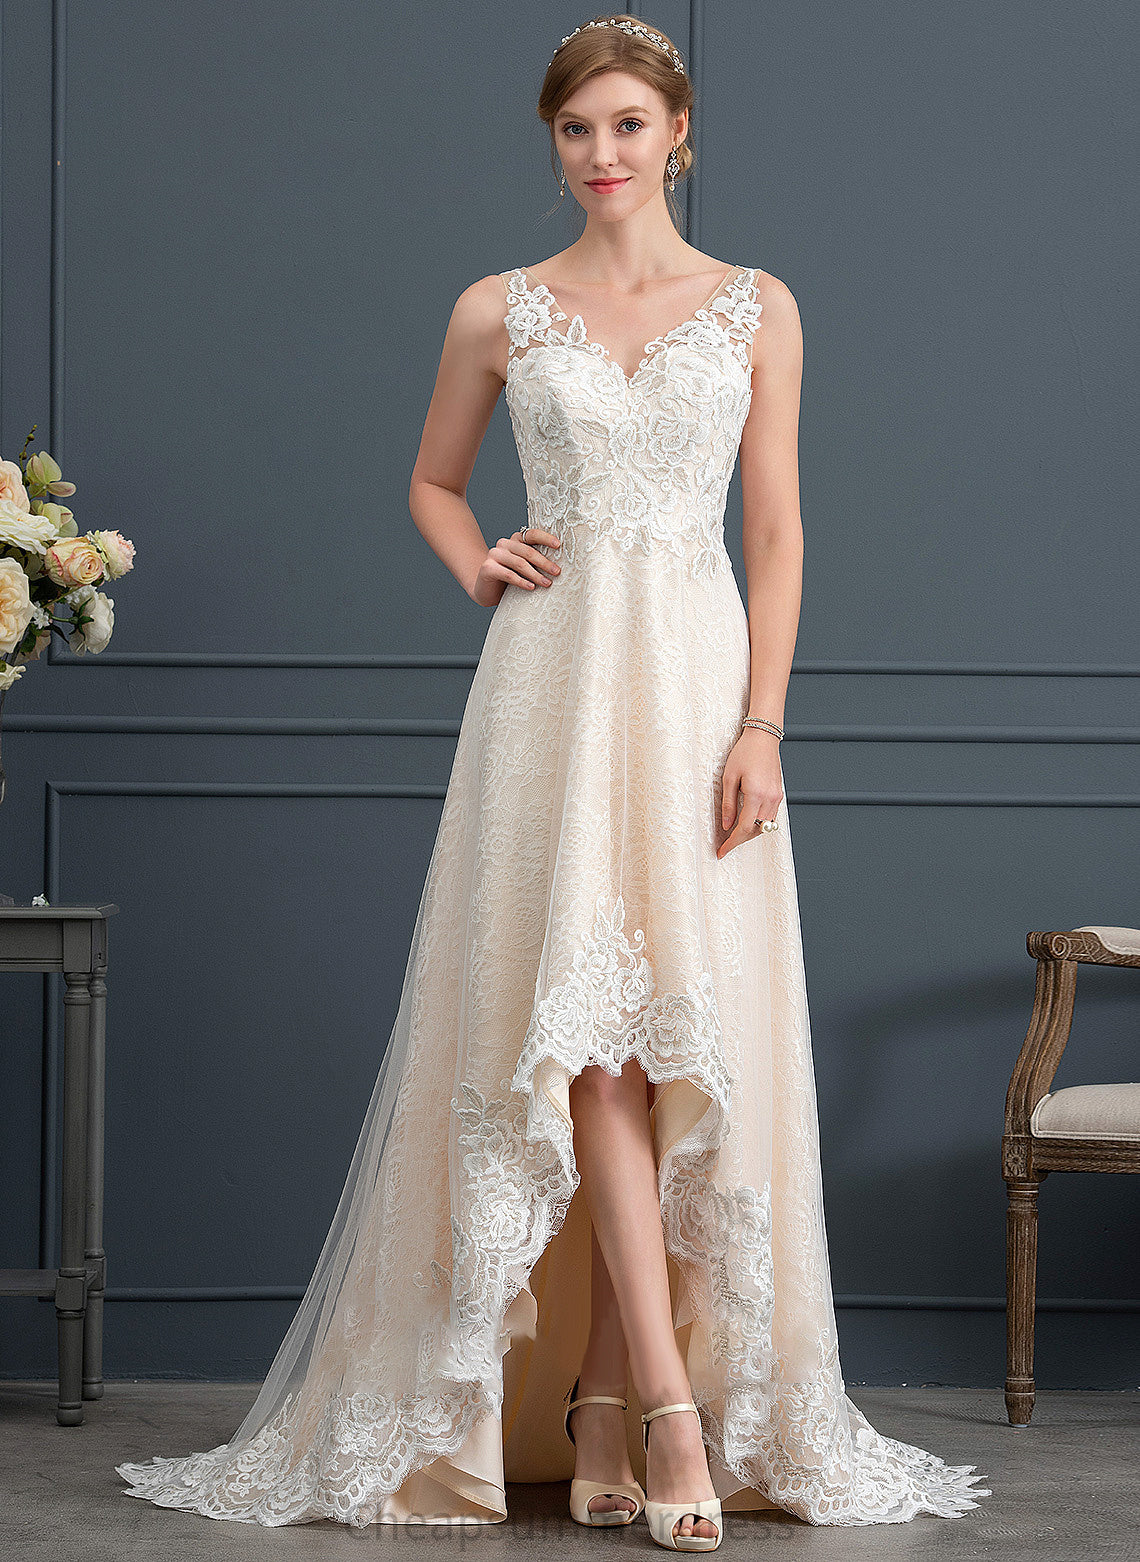 With Dress Wedding Tulle Wedding Dresses V-neck Asymmetrical A-Line Morgan Lace